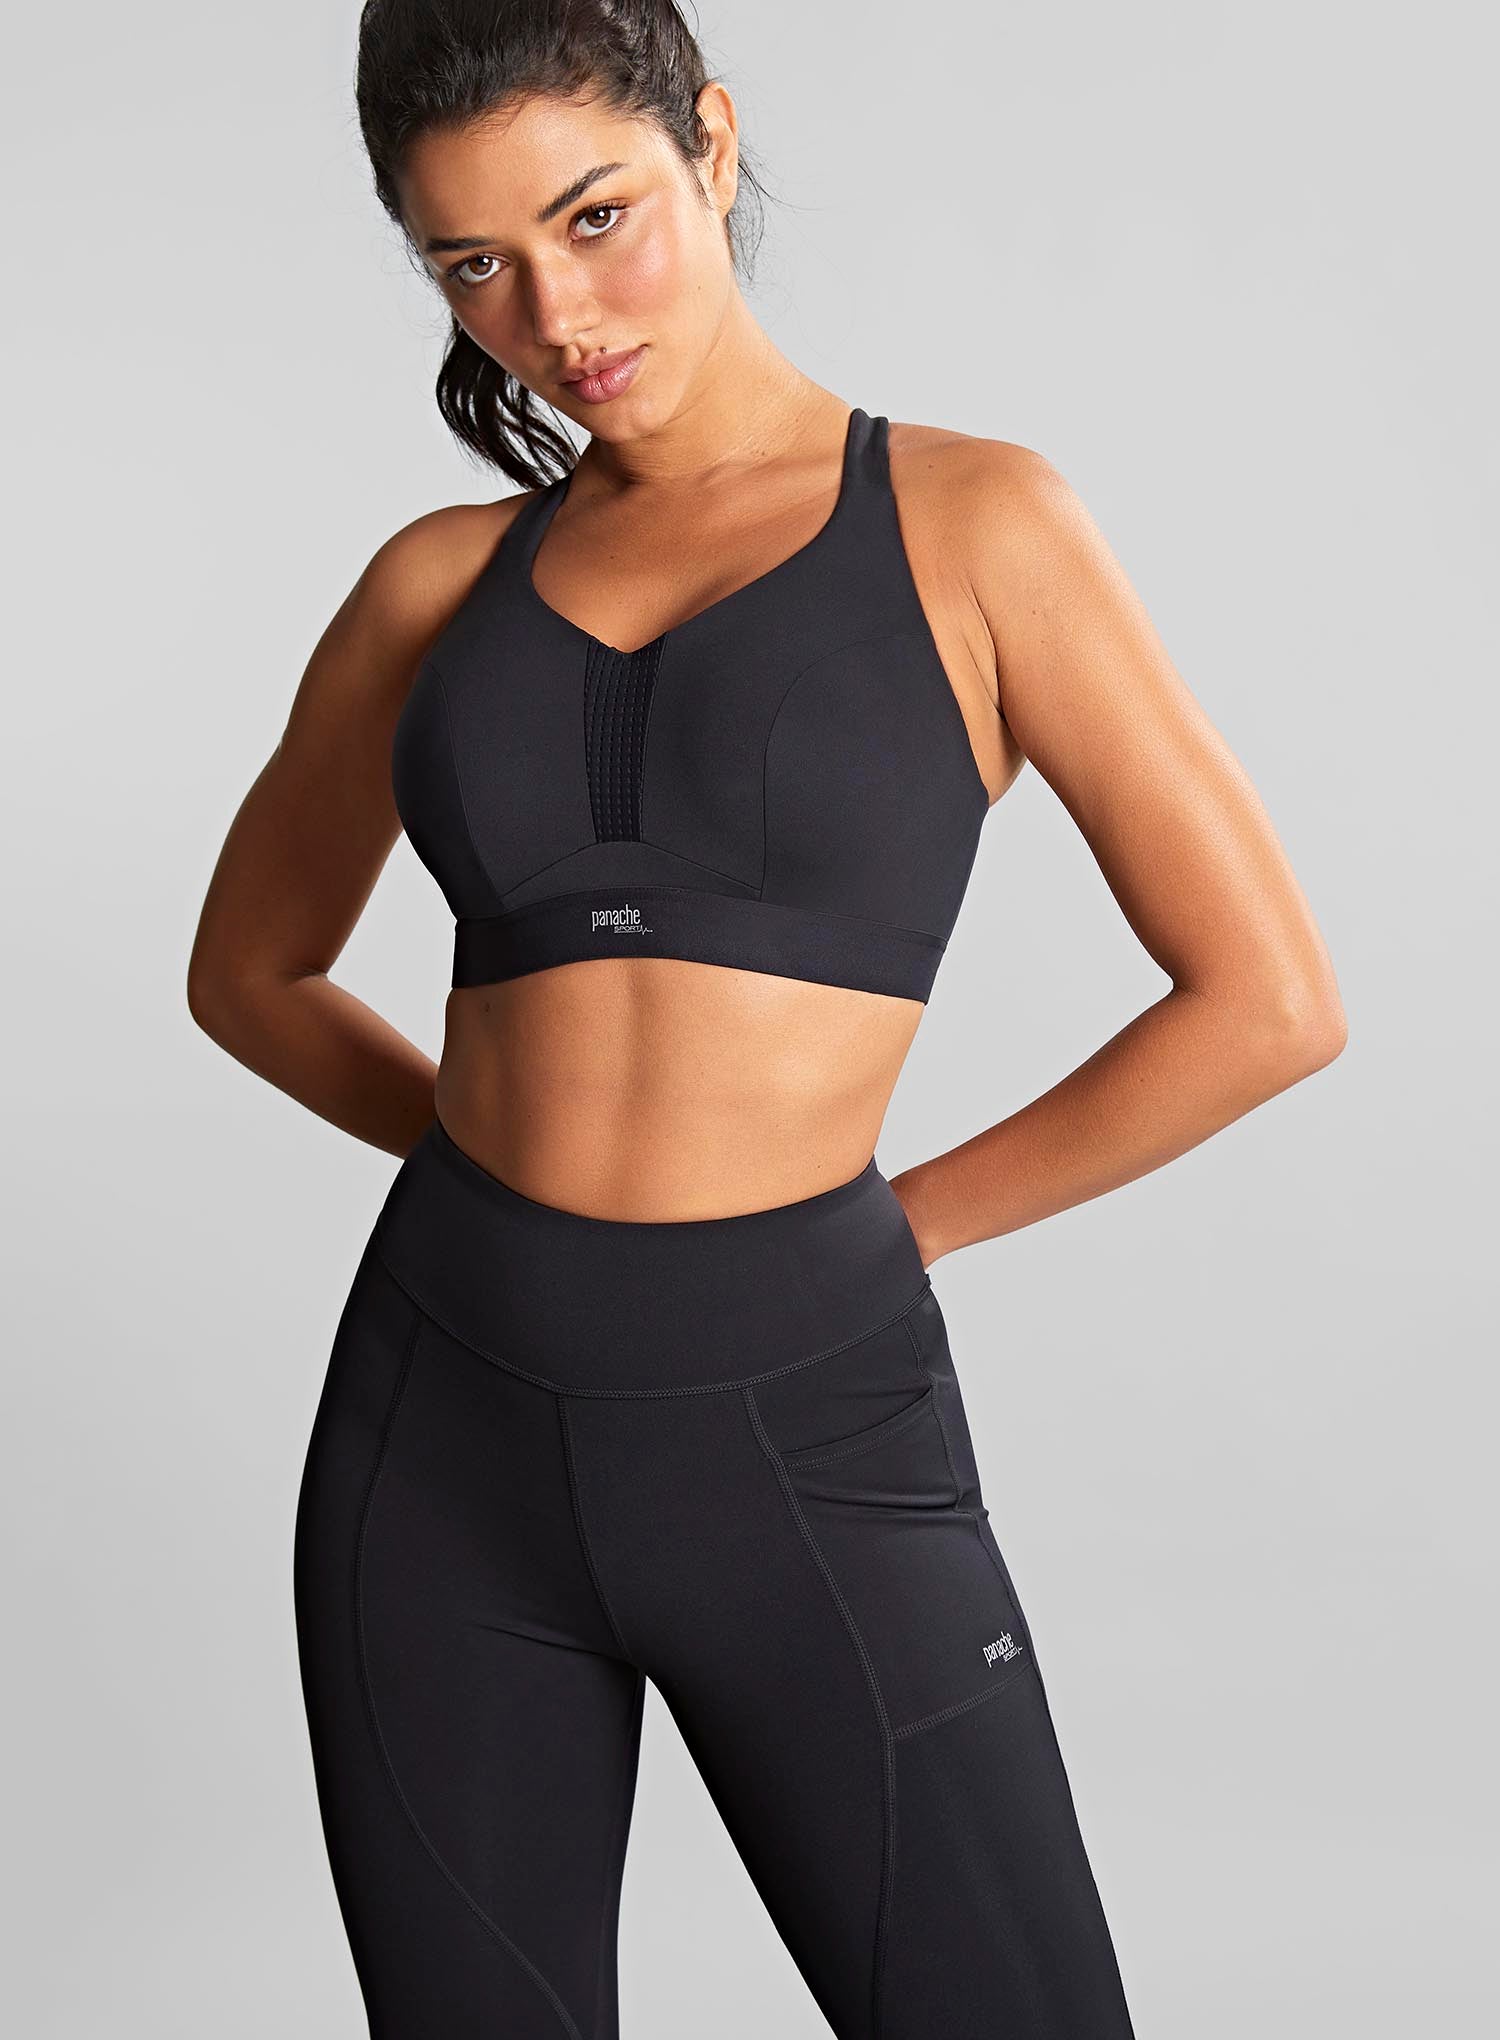 Panache Sport Ultra Perform Non Padded Wired Sports Bra